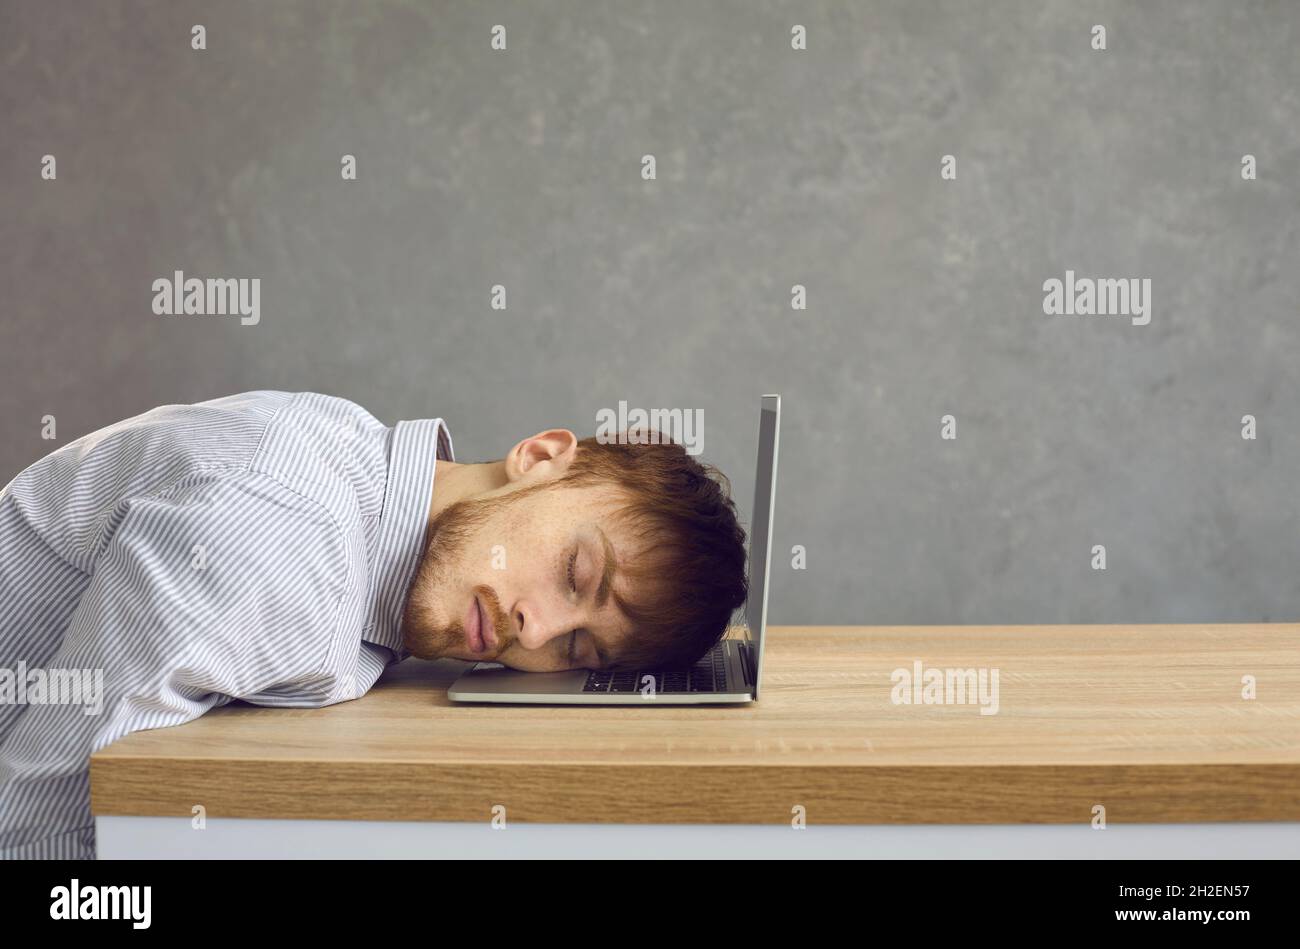 Tired male office worker sleeping sitting at a desk putting his head on a laptop keyboard. Stock Photo